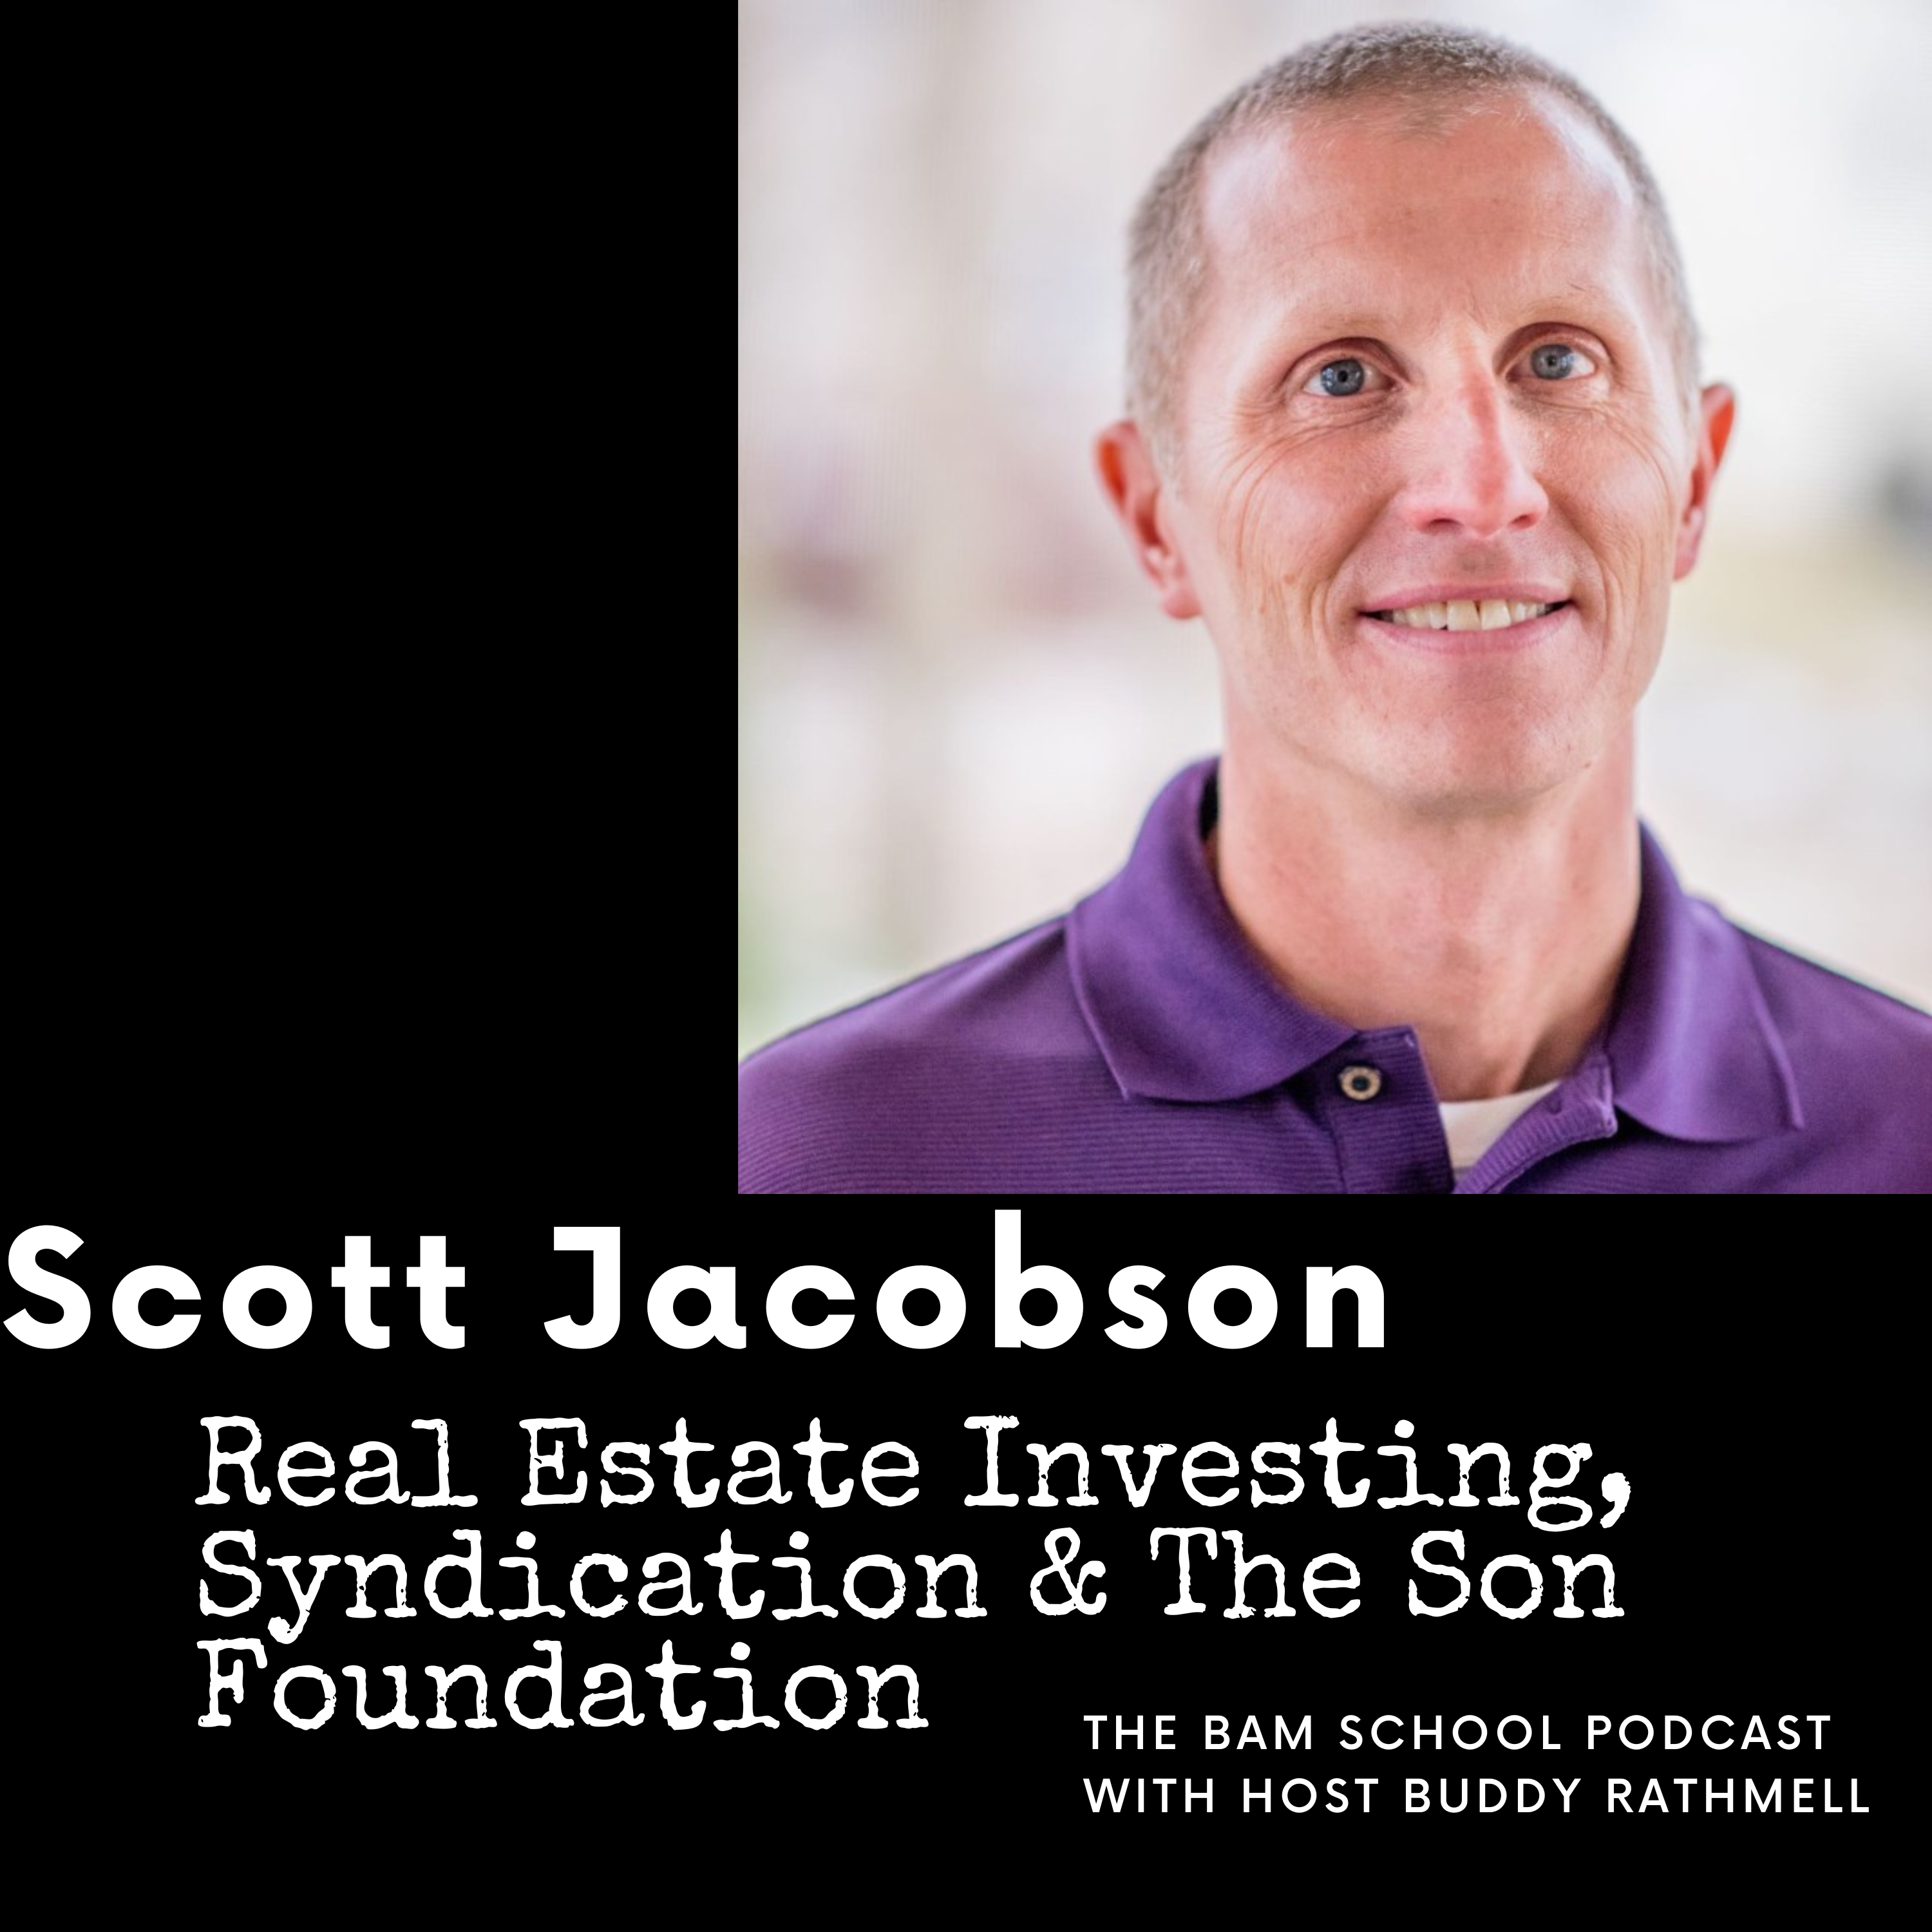 Scott Jacobson - Real Estate Investing, Syndication and Giving Back through the Son Foundation